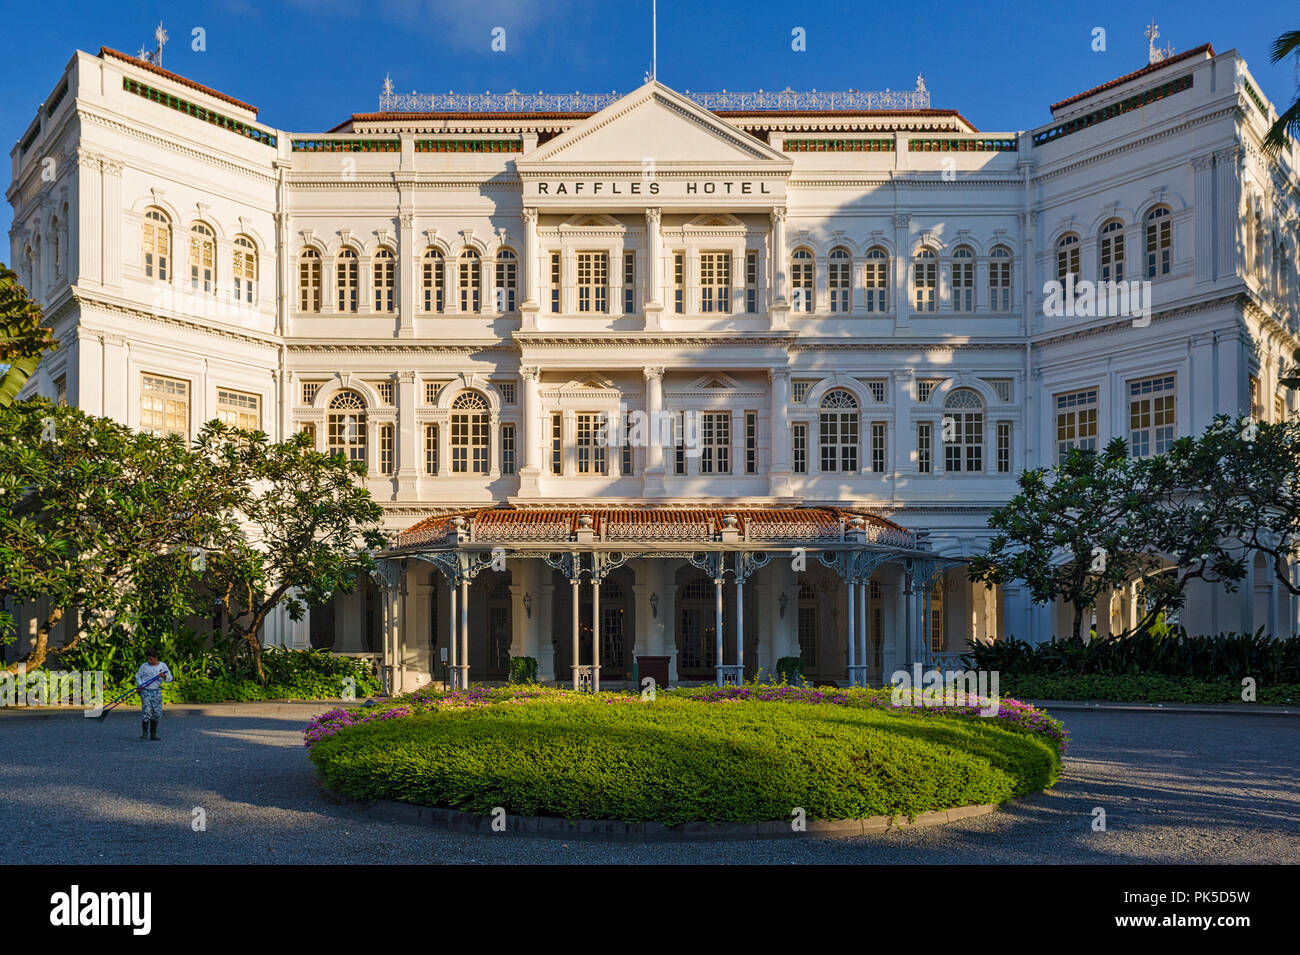 Singapore Raffles Hotel is a colonial-style hotel built by Armenian hoteliers, the Sarkies Brothers, in 1887. Stock Photo